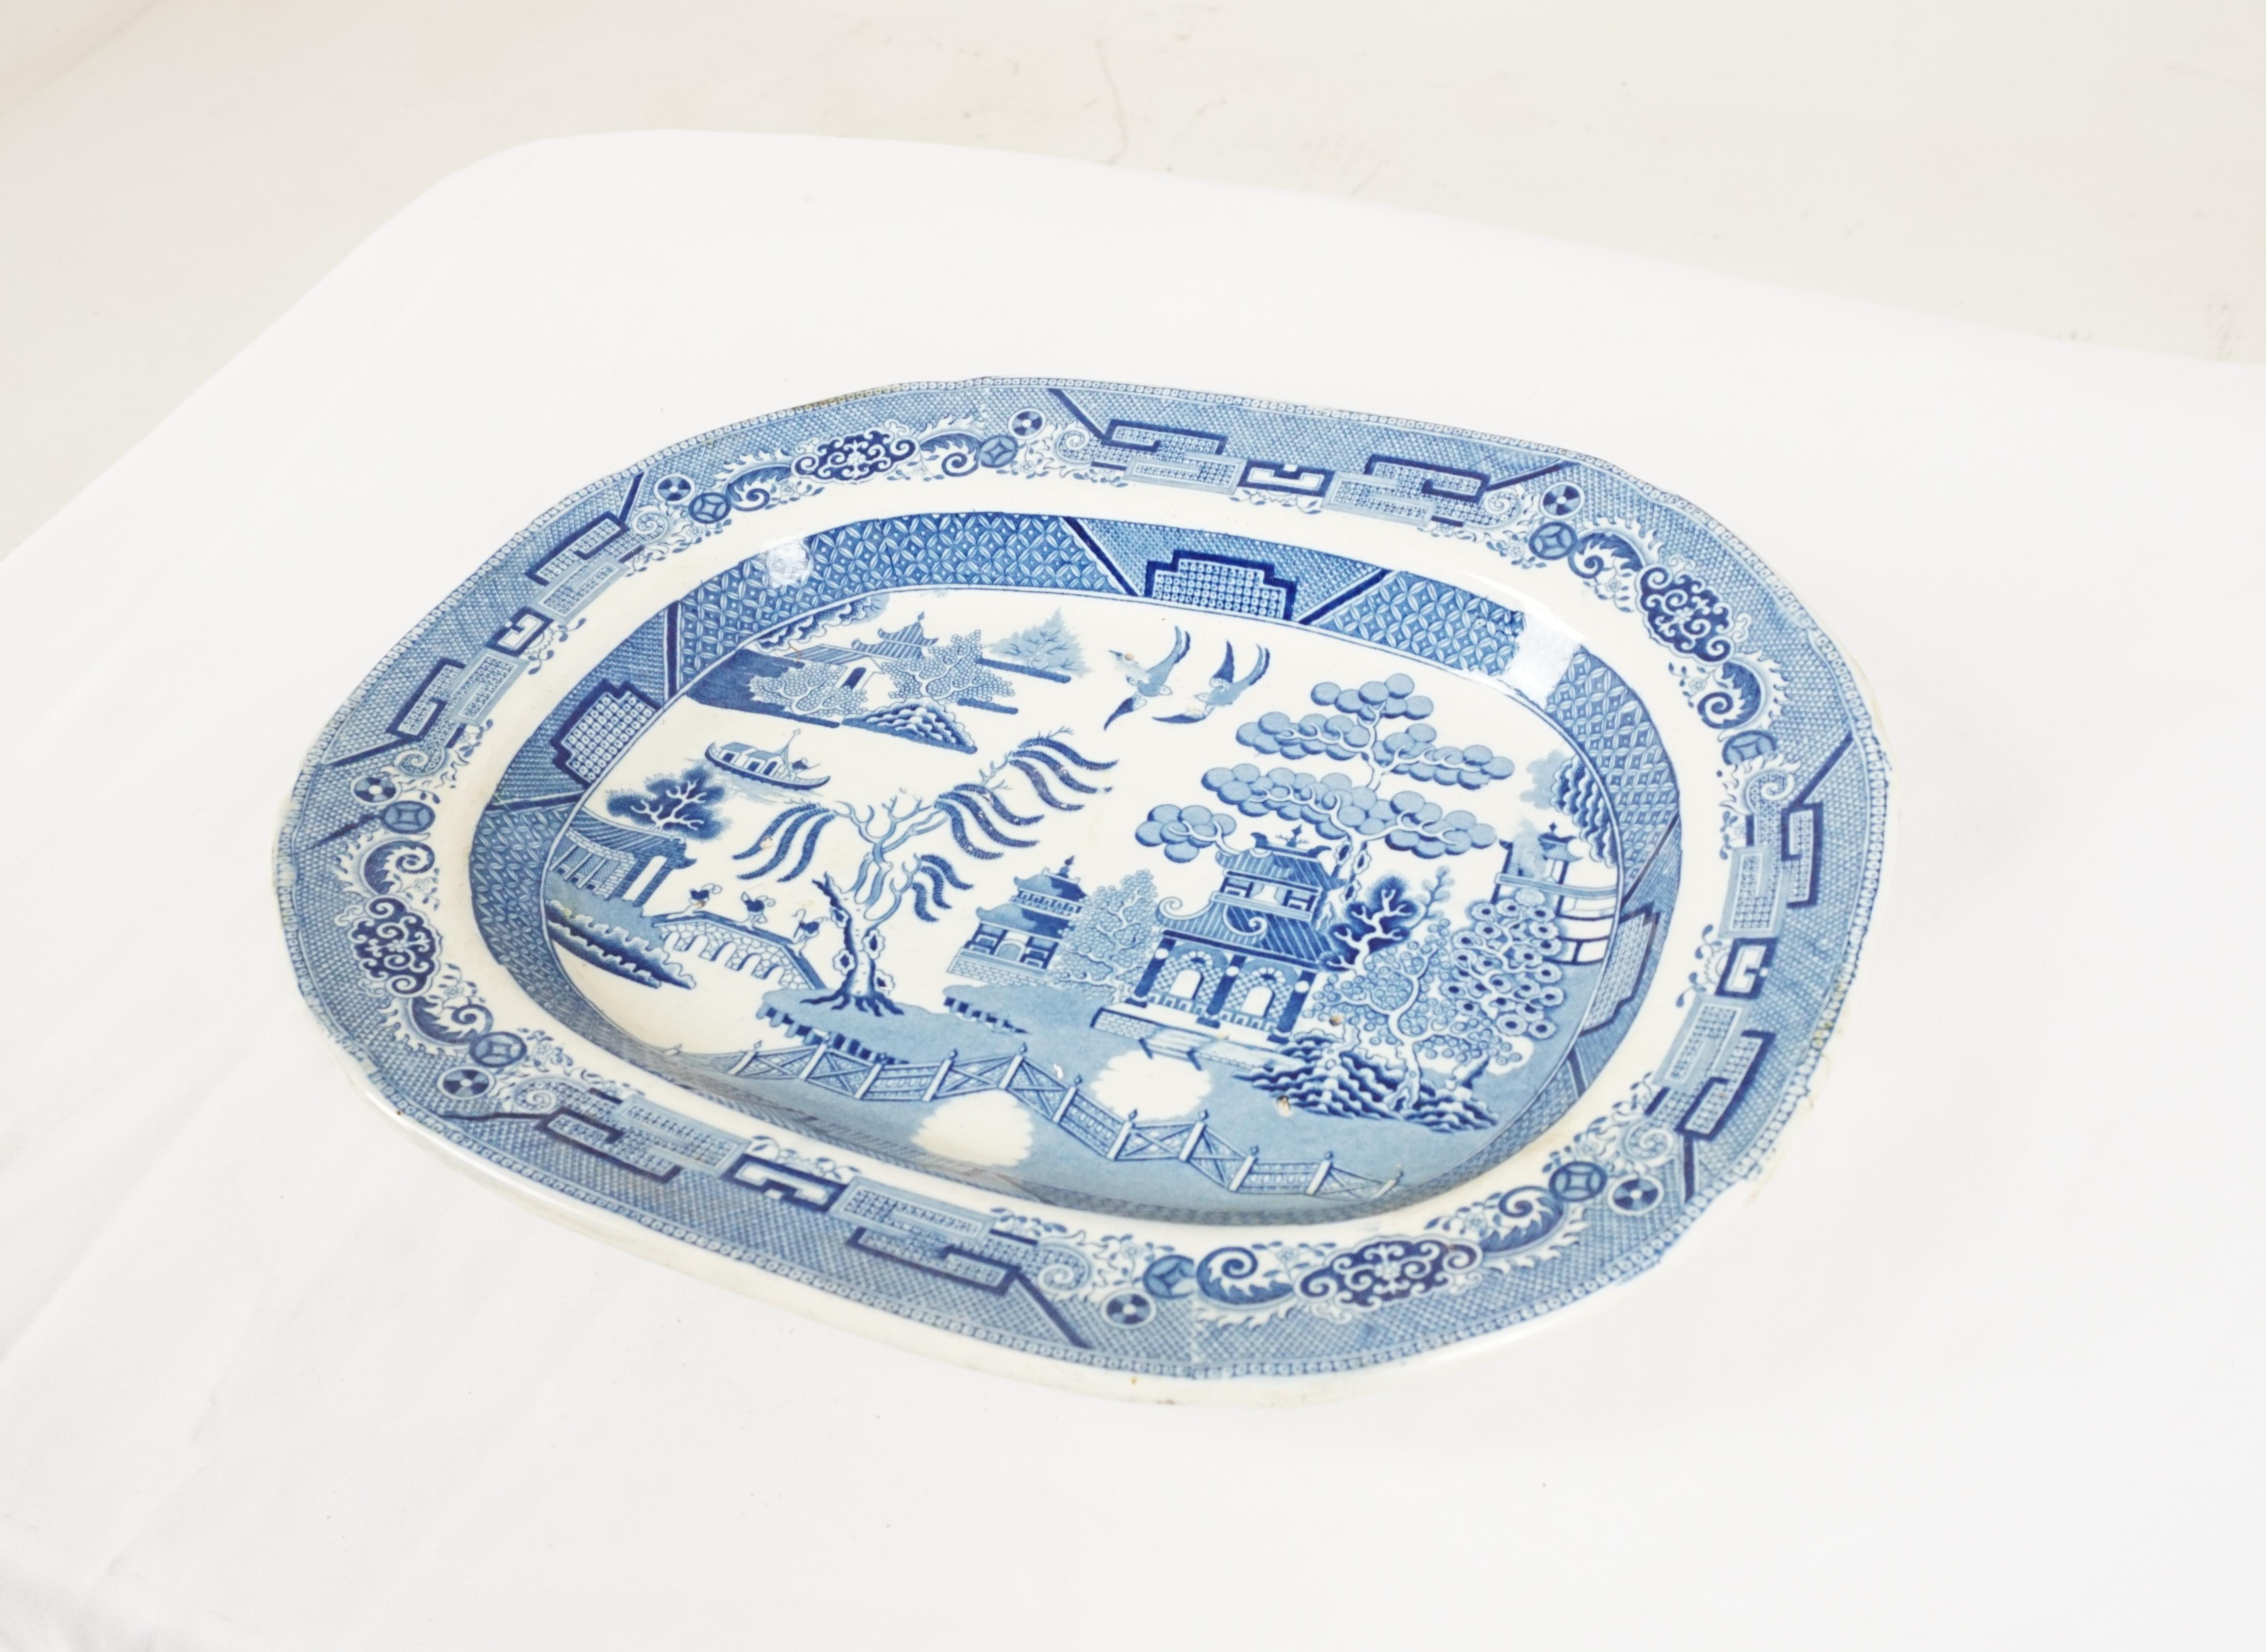 Mid 19th century pearlware blue willow transfer platter, England 1840, H631

England 1890
Tree has well shaped impression into the body and has a blue and white pattern
Has a blue and white willow pattern
